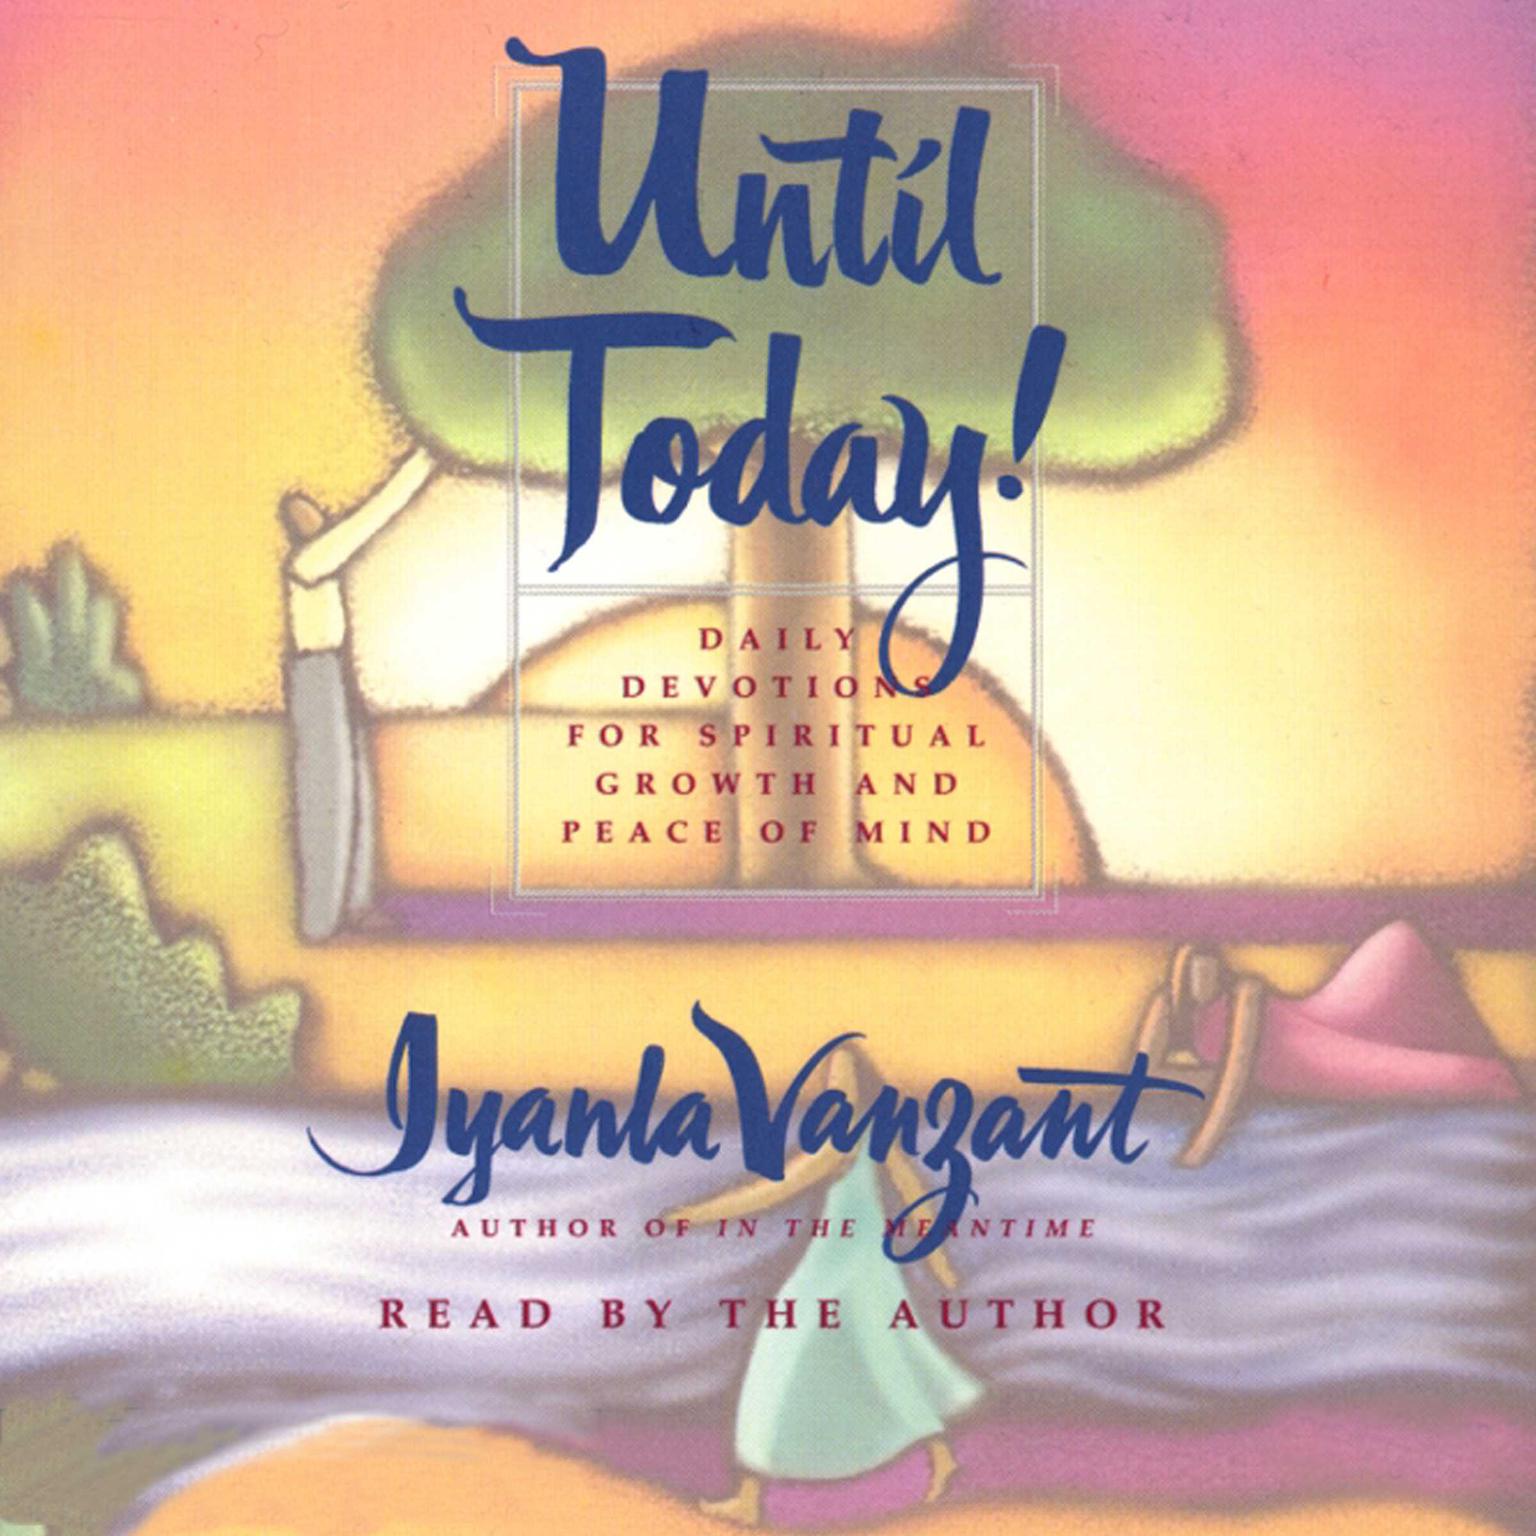 Until Today! (Abridged): Daily Devotions for Spiritual Growth and Peace of Mind Audiobook, by Iyanla Vanzant